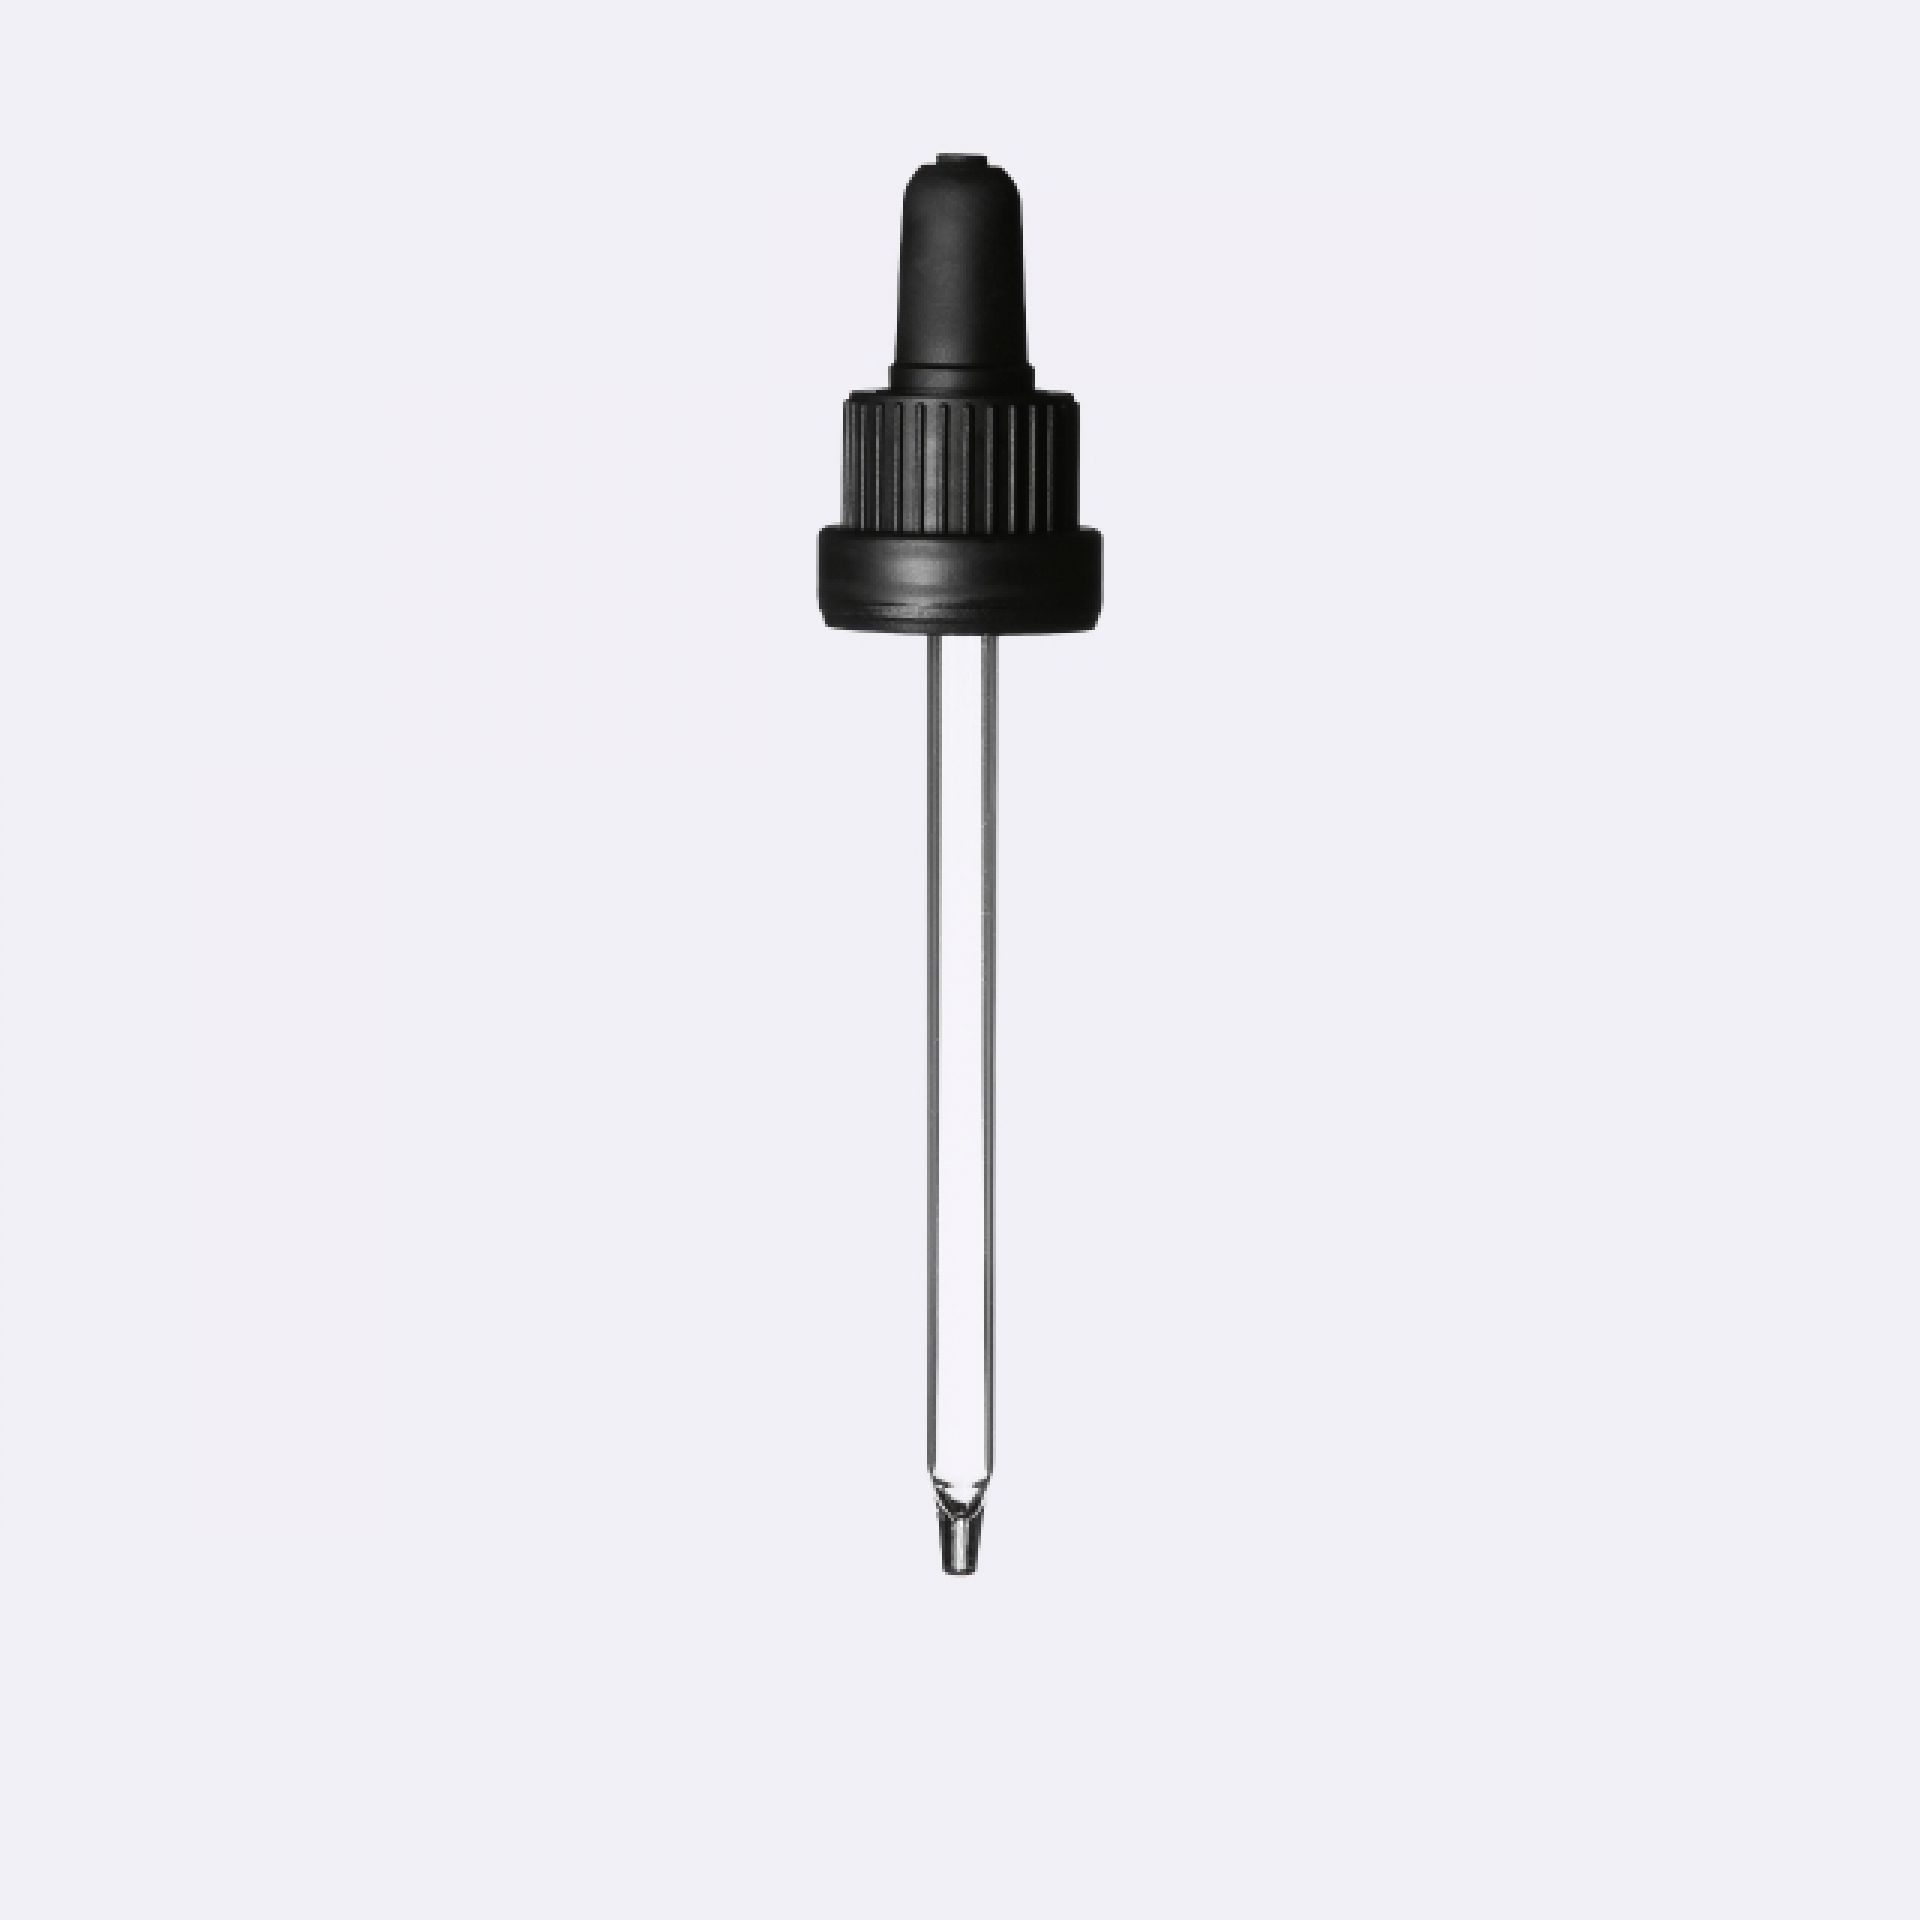 Pipette tamper evident DIN18, III, black, ribbed, bulb TPE, dose 0.7ml, conical tip (Orion 50)